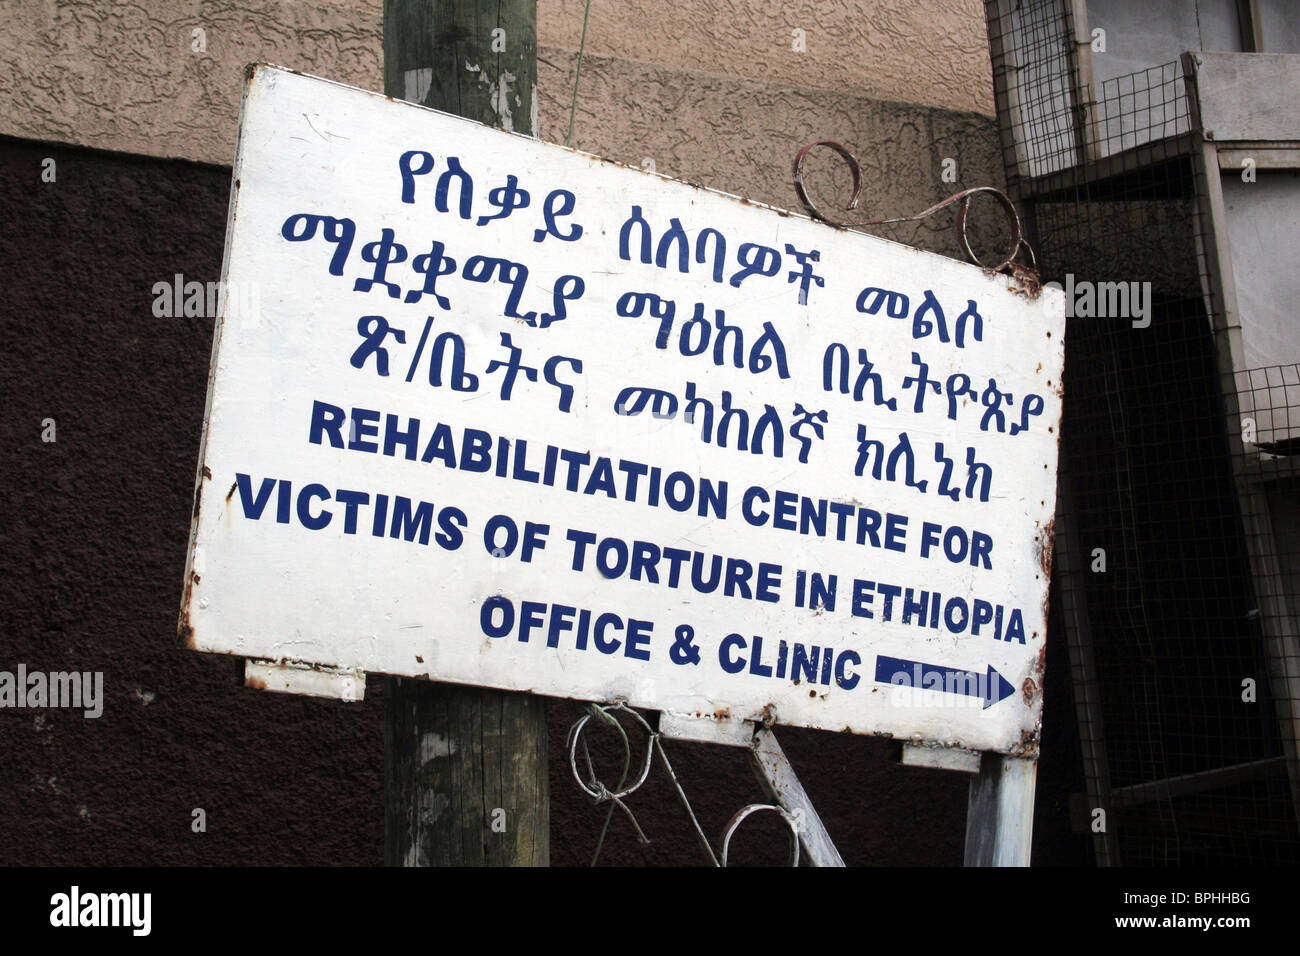 Sign [in English and Amharic] for Rehabilitation Centre for Victims of Torture in Ethiopia, Addis Ababa, Ethiopia, east Africa Stock Photo